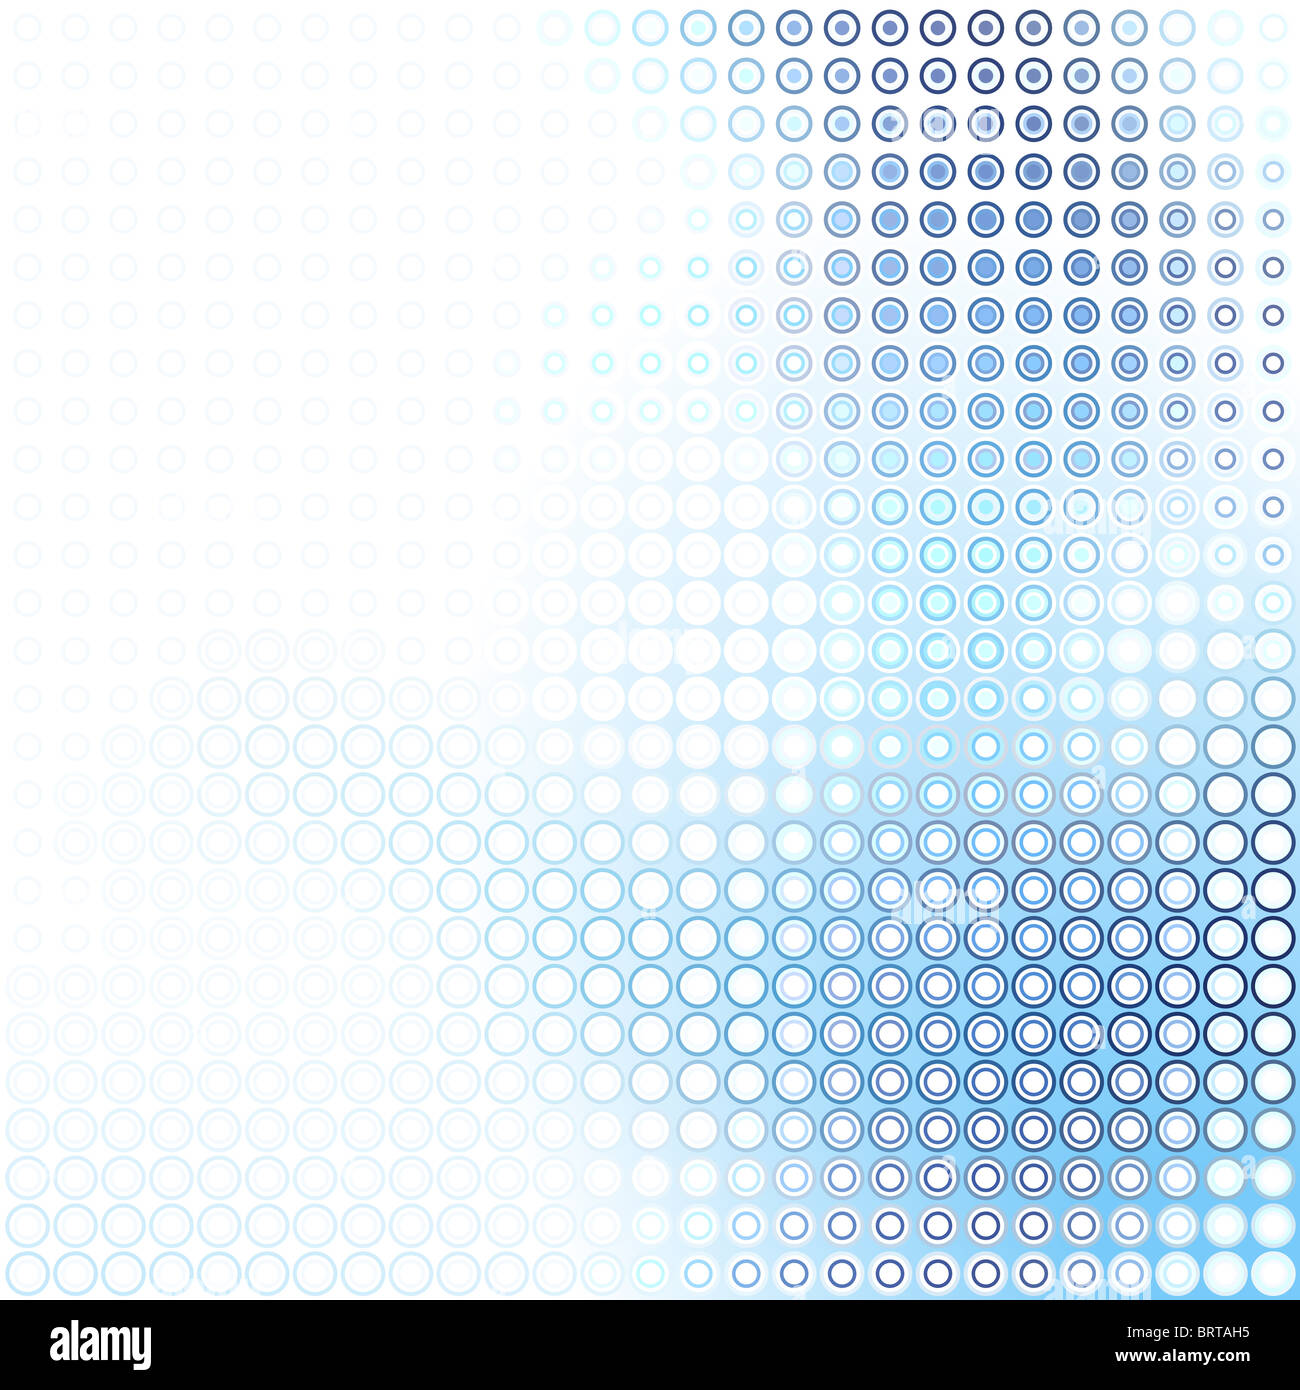 Abstract background illustration of blue and white circles Stock Photo